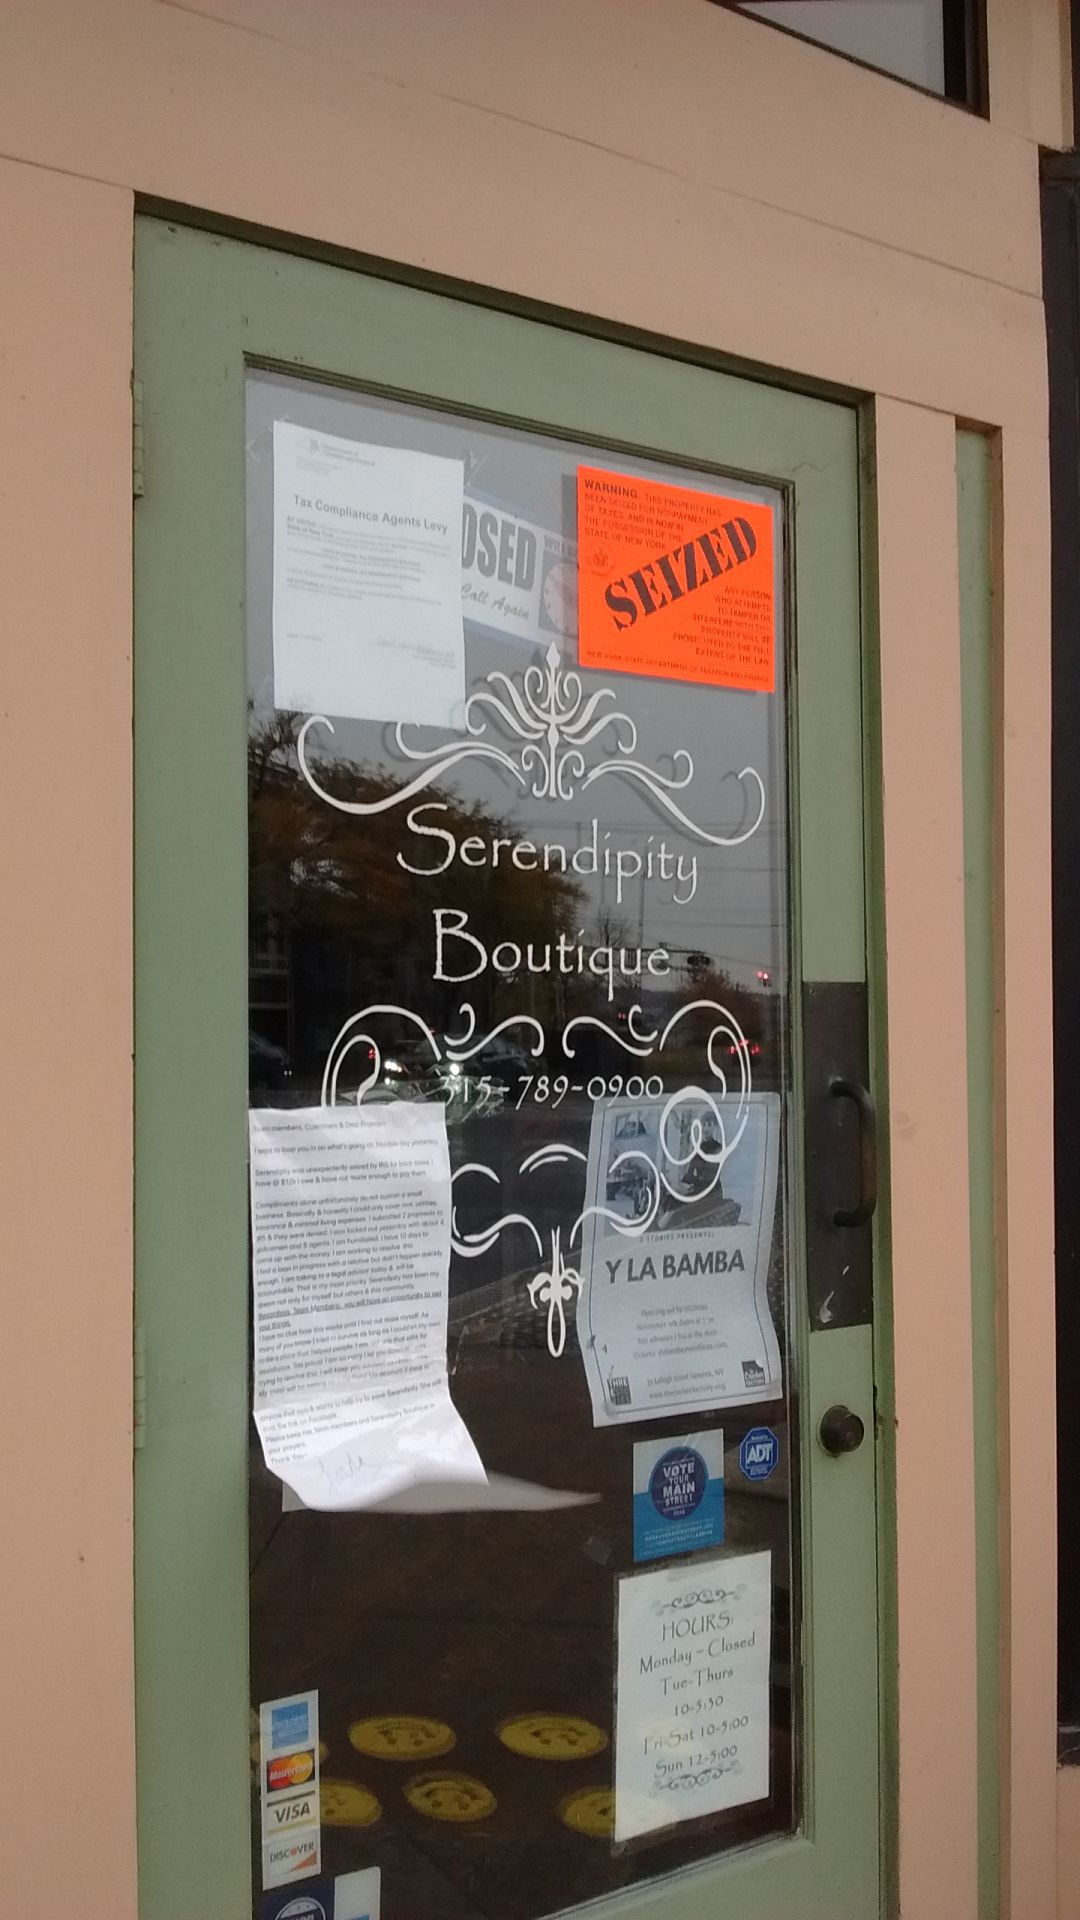 Superior Fireplace Doors Inspirational Serendipity Boutique Shut Down by State Tax Department